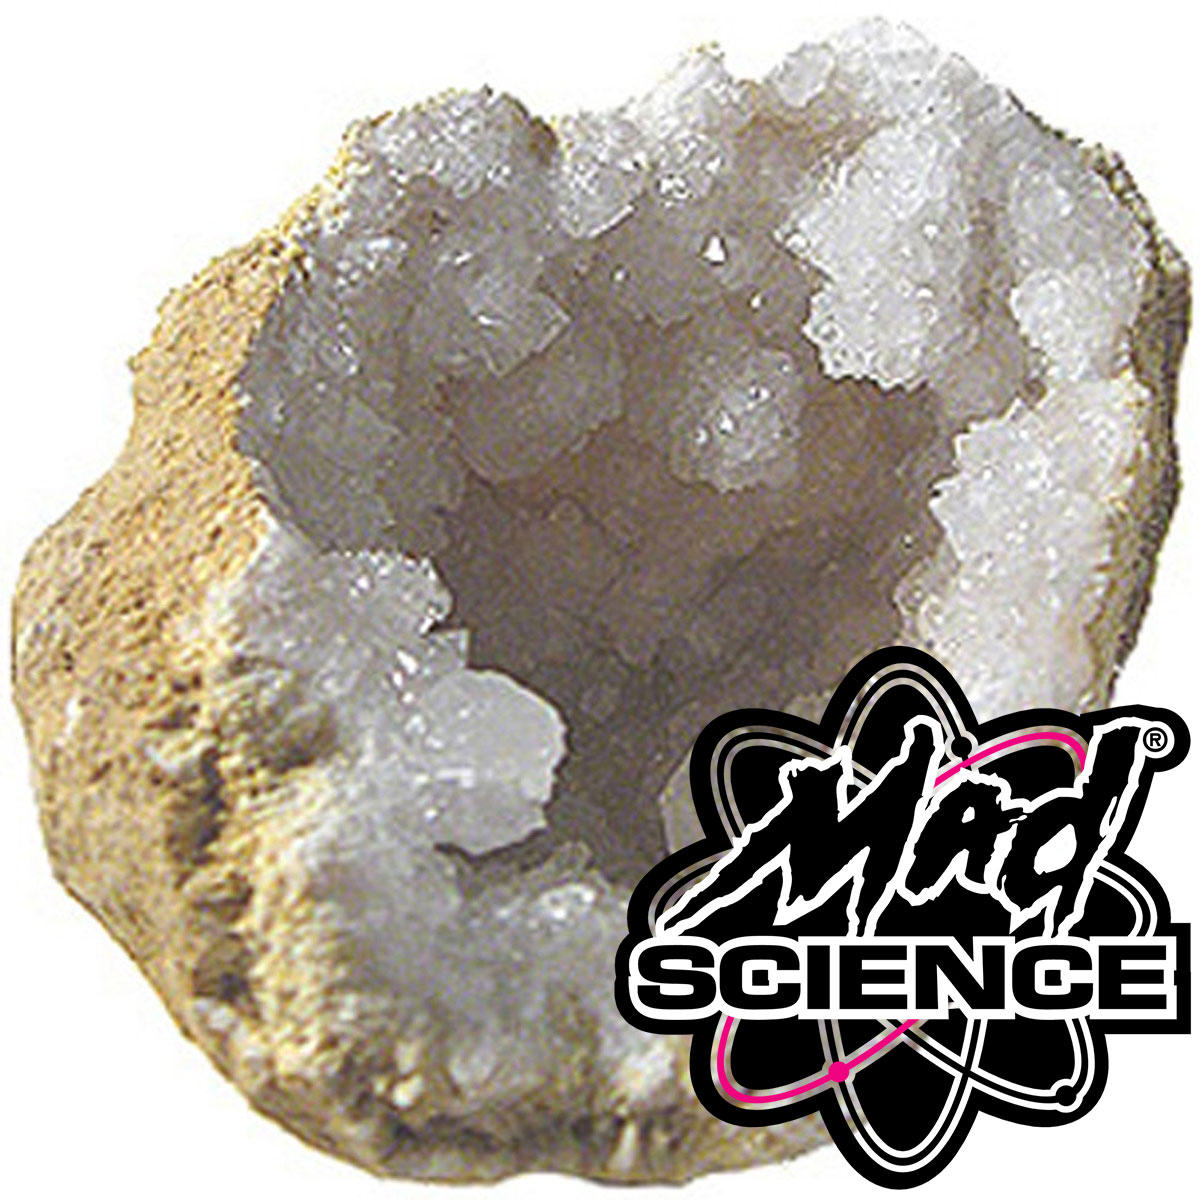 Geode with a Mad Science logo superimposed over it